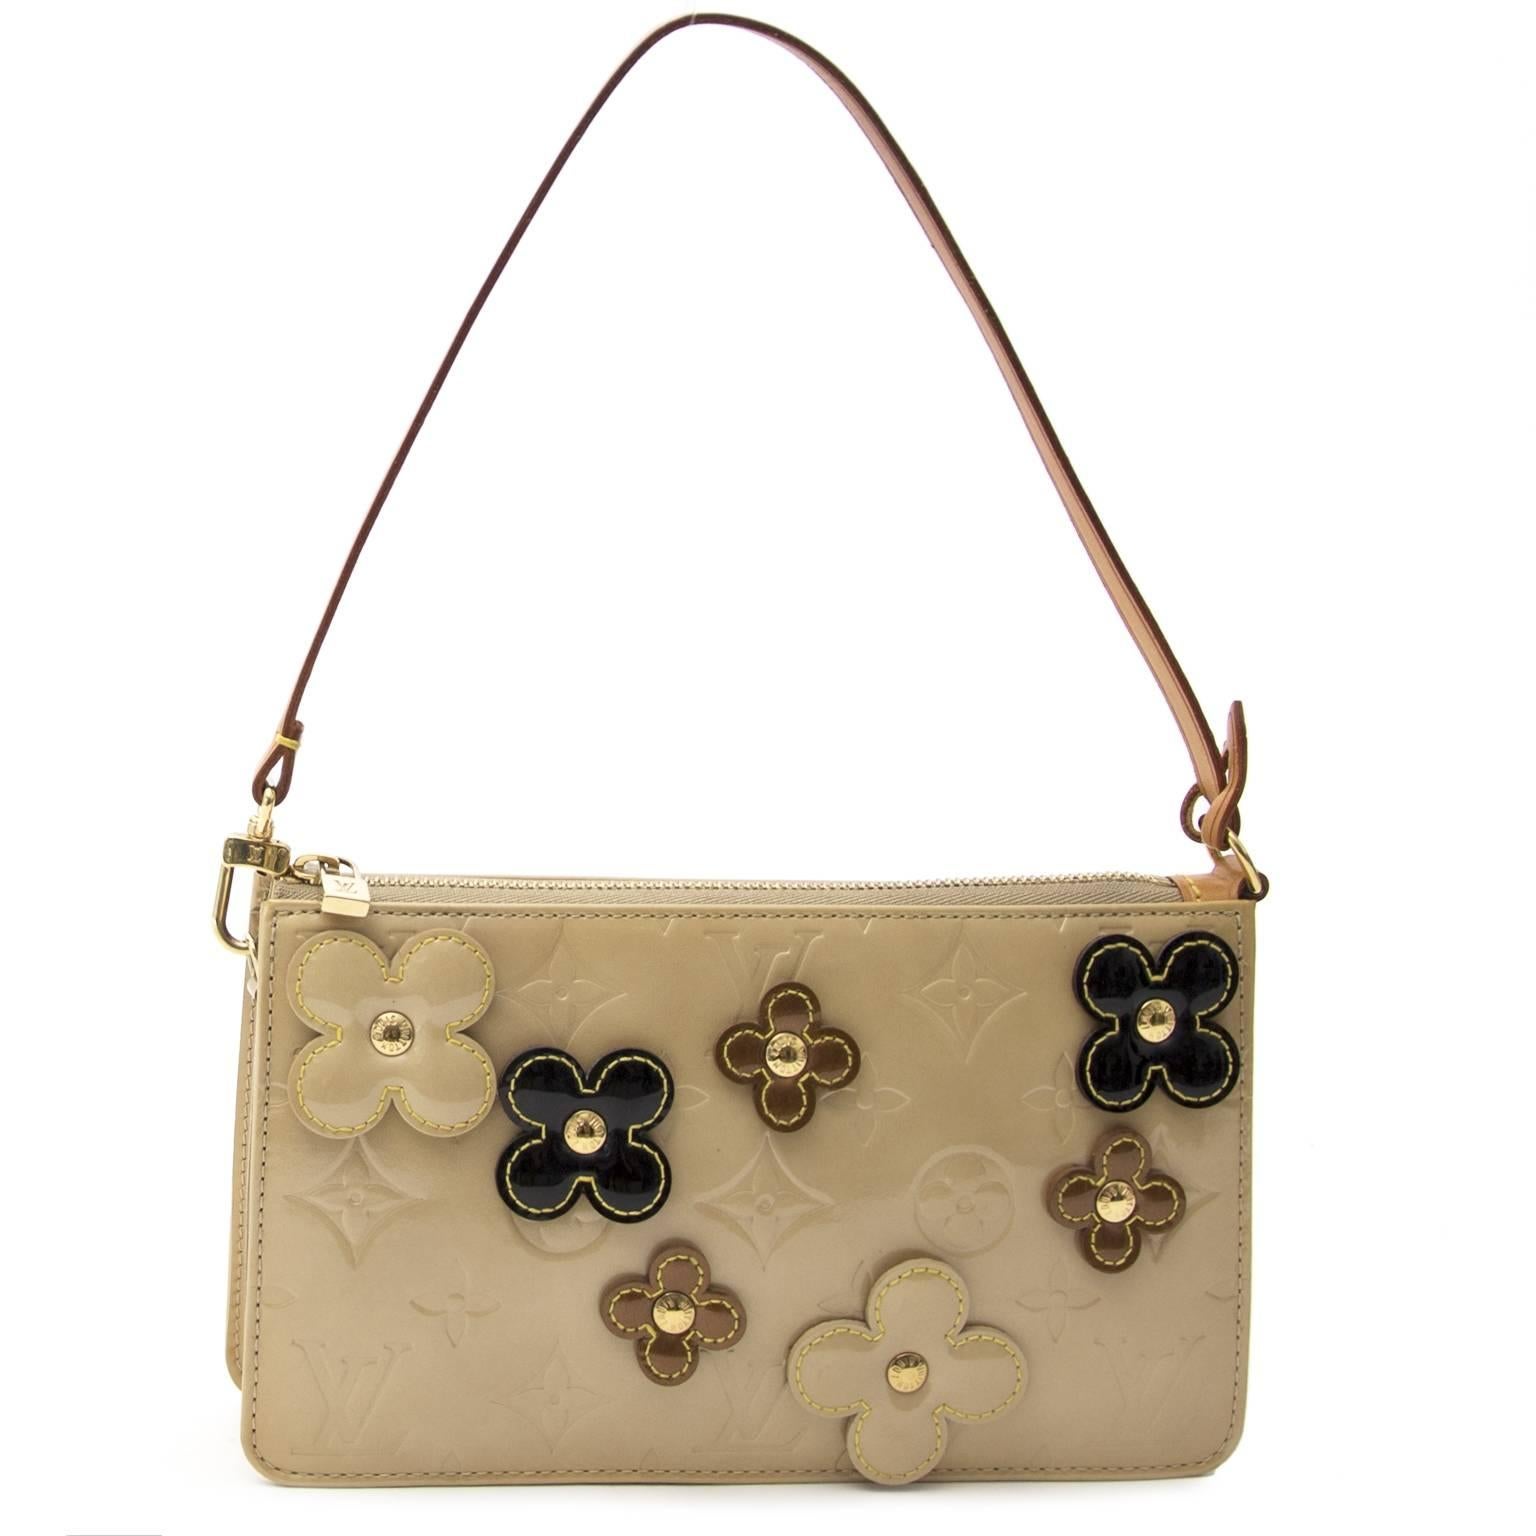 Hard To Find Louis Vuitton Beige Lexington Fleurs Pochette accessory pouch.

The pochette is made out of beige patent leather, with the typical Louis Vuitton flowers.

You can wear it on your shoulder or as a clutch for the evening.

It is in very